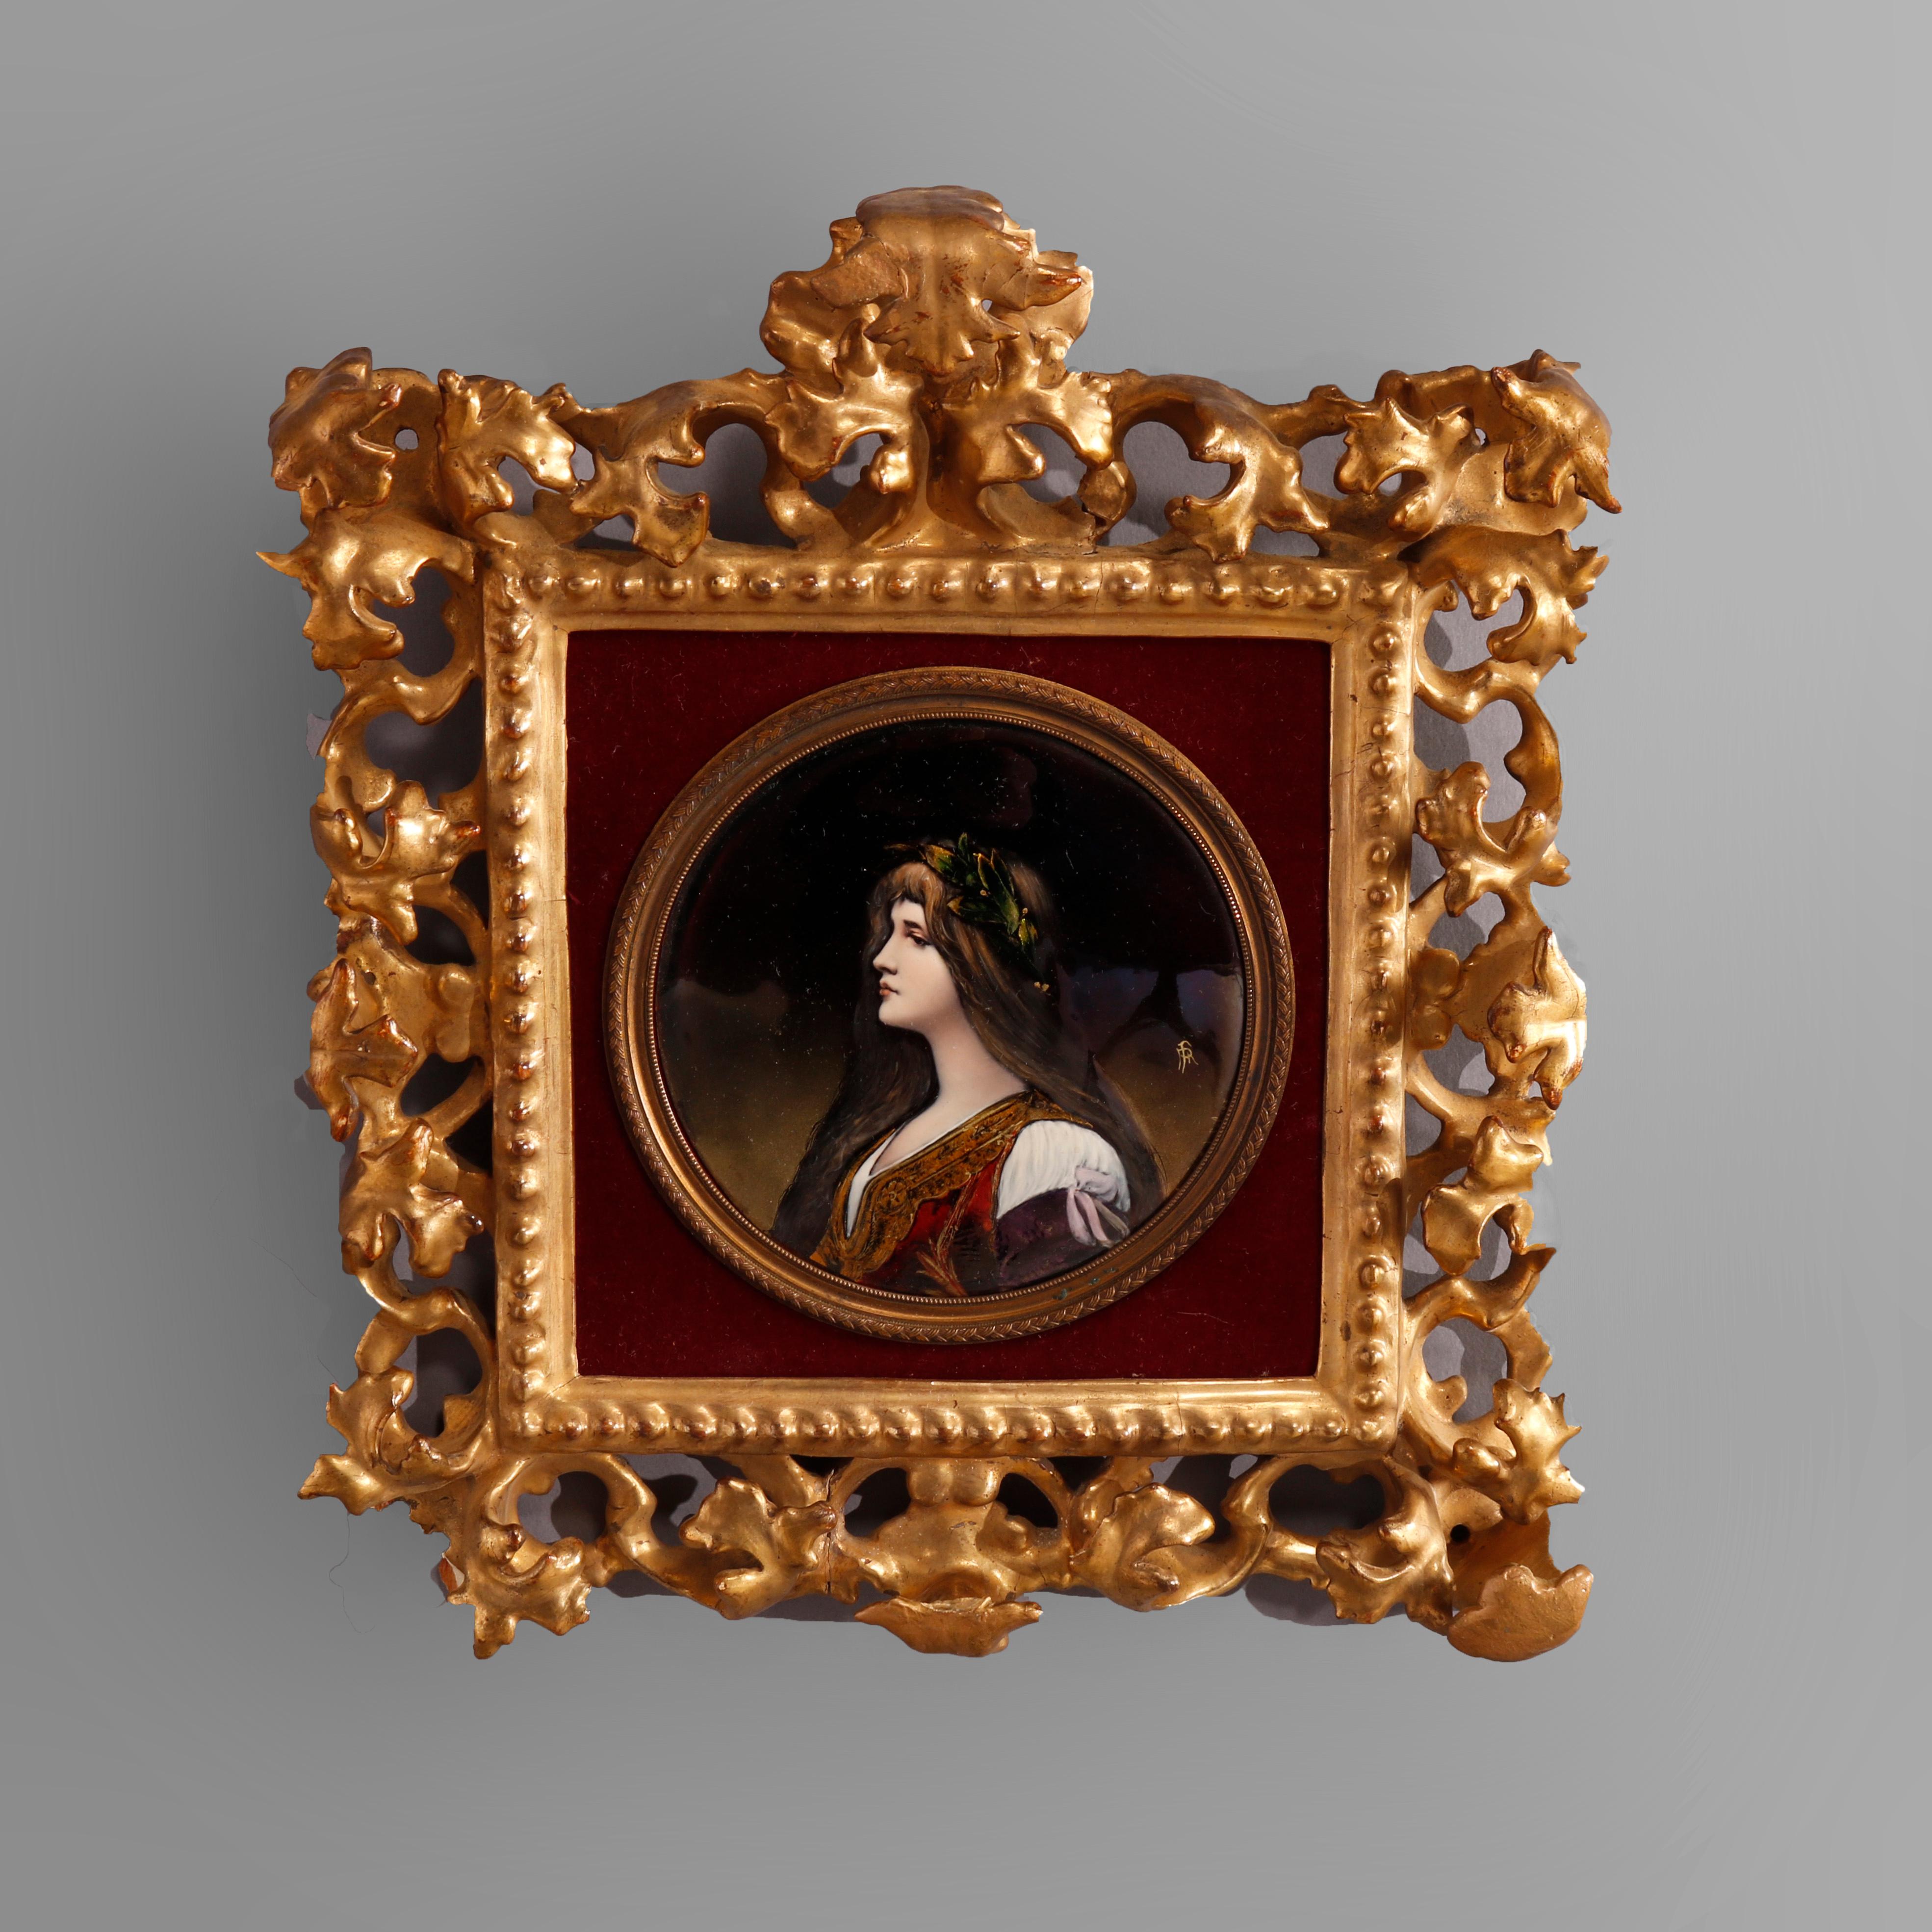 An antique Italian painting offers enamel on copper portrait of a Classical woman seated in reticulated foliate giltwood frame, artist signed with initials as photographed, 19th century

Measures - 11.5'' H x 10.5'' W x 2'' D.

Catalogue Note: Ask